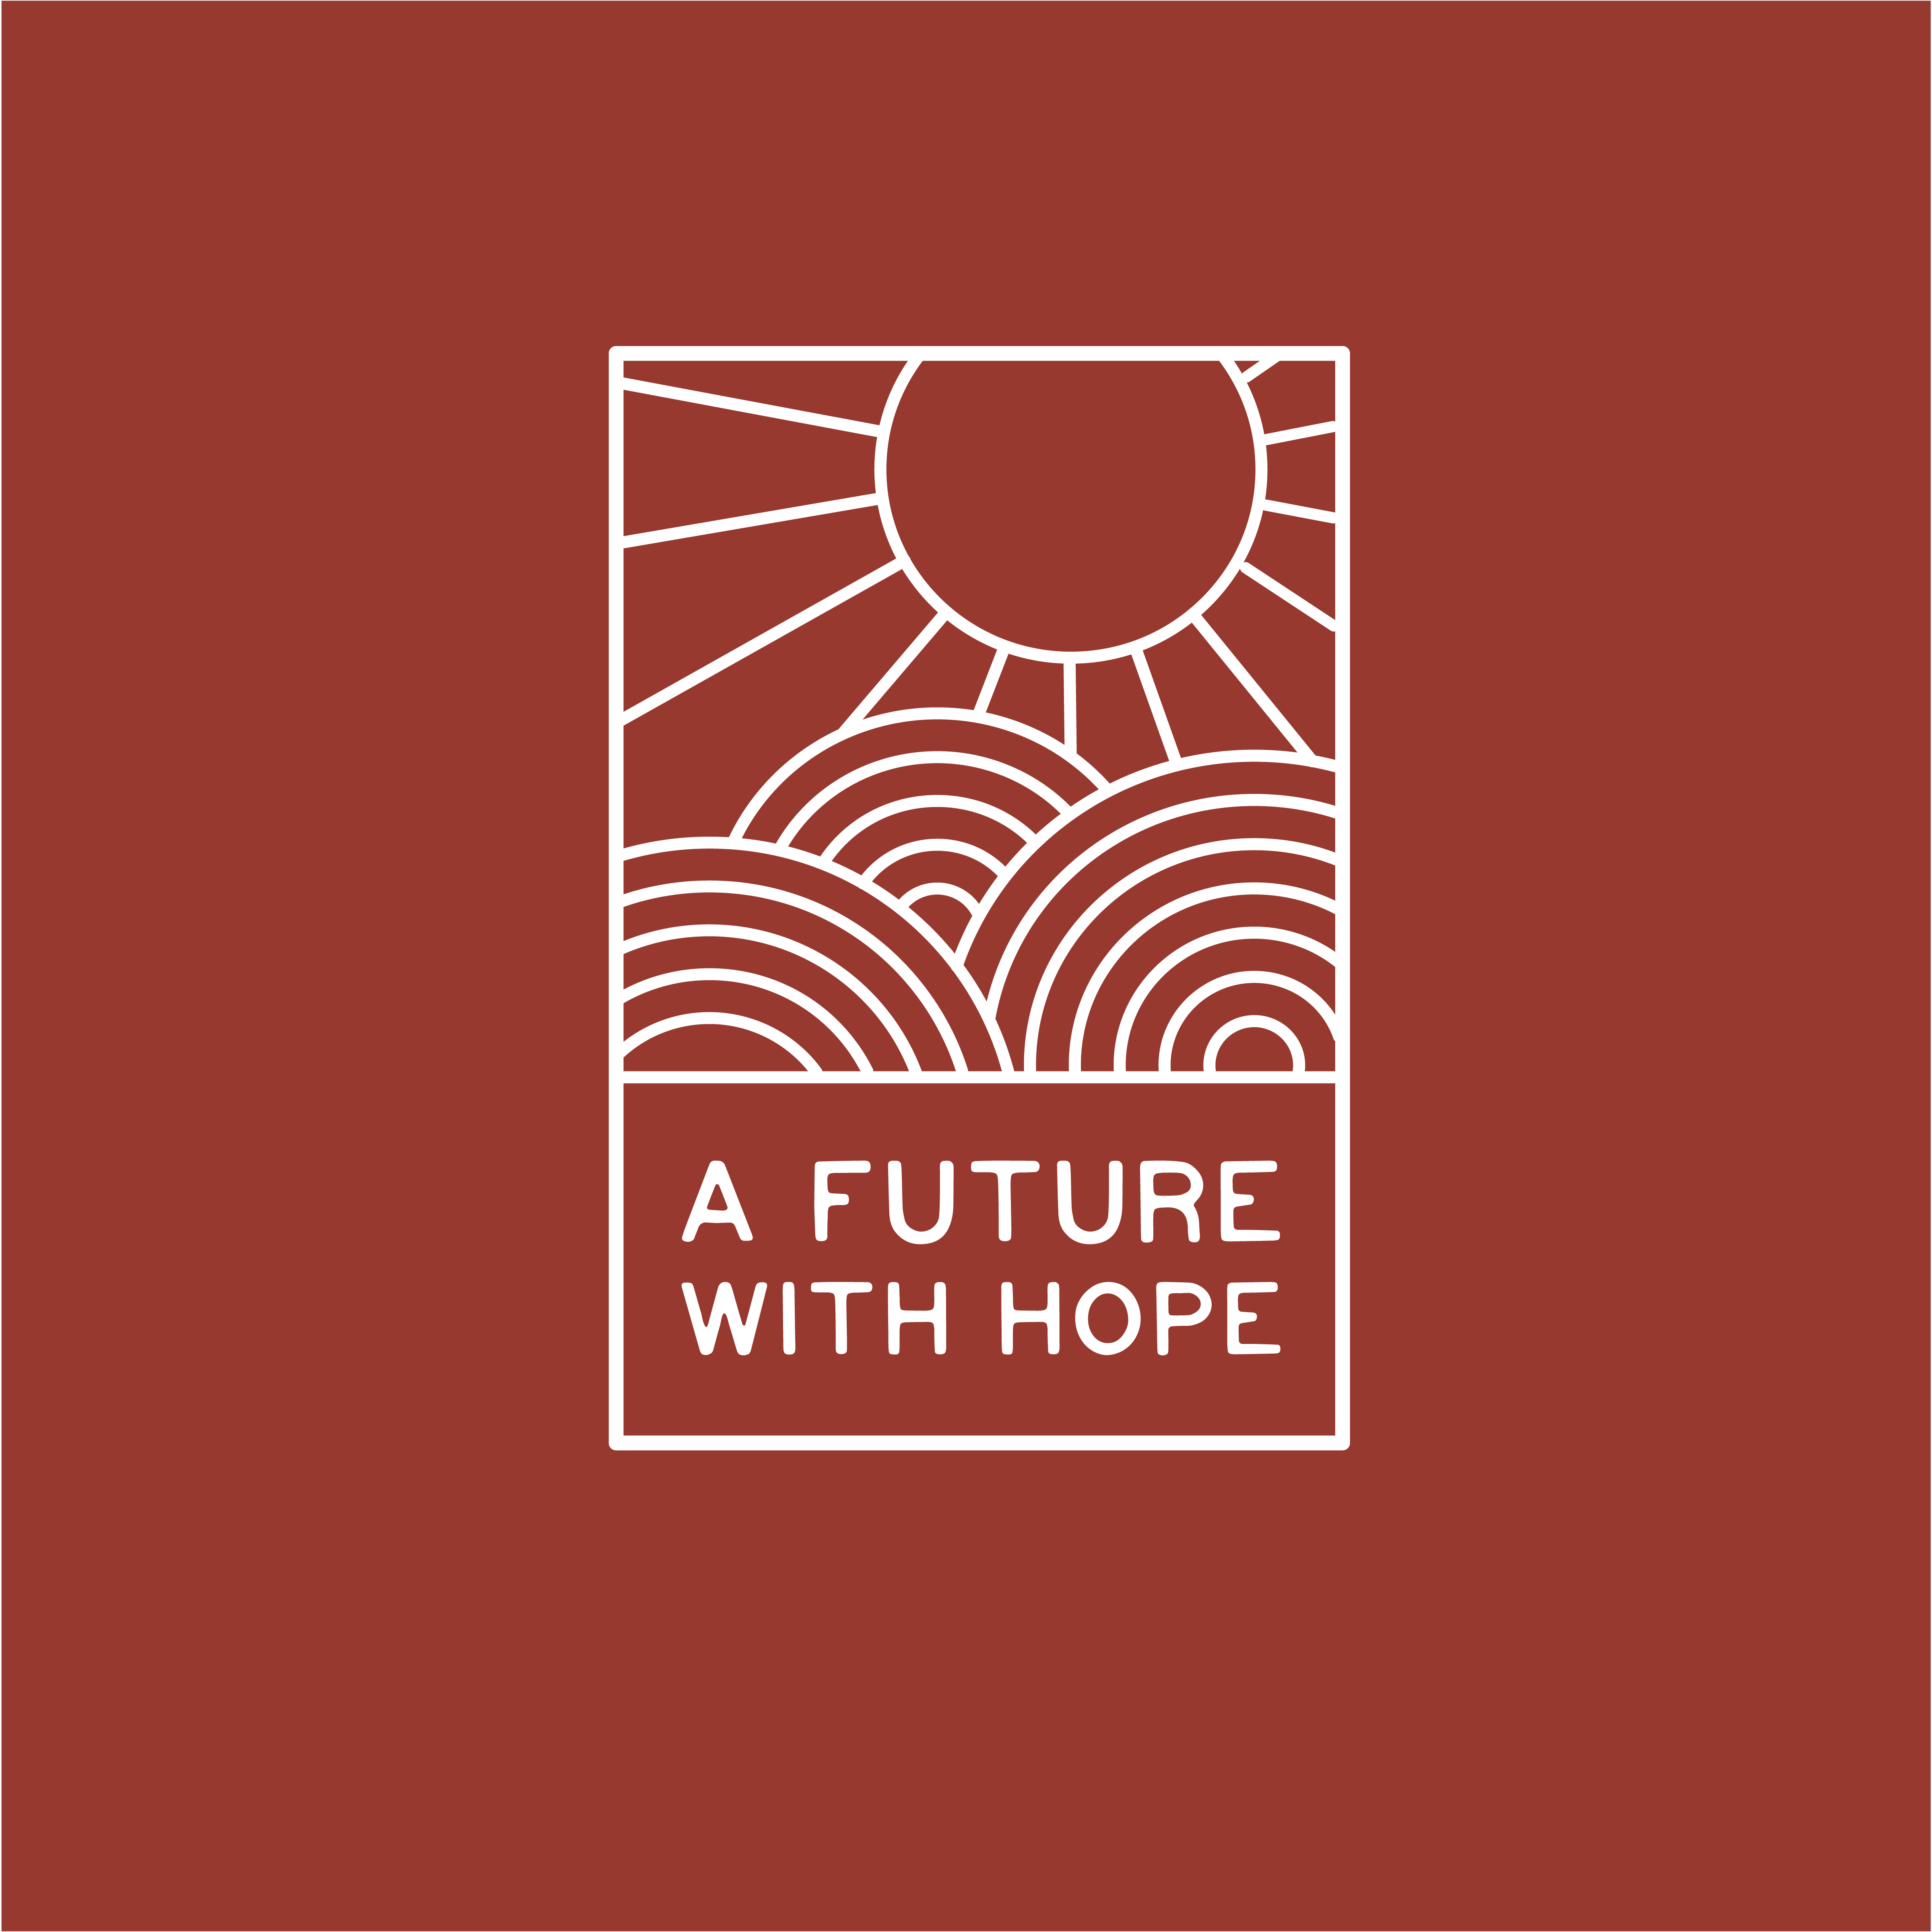 A Future With Hope Logos 02